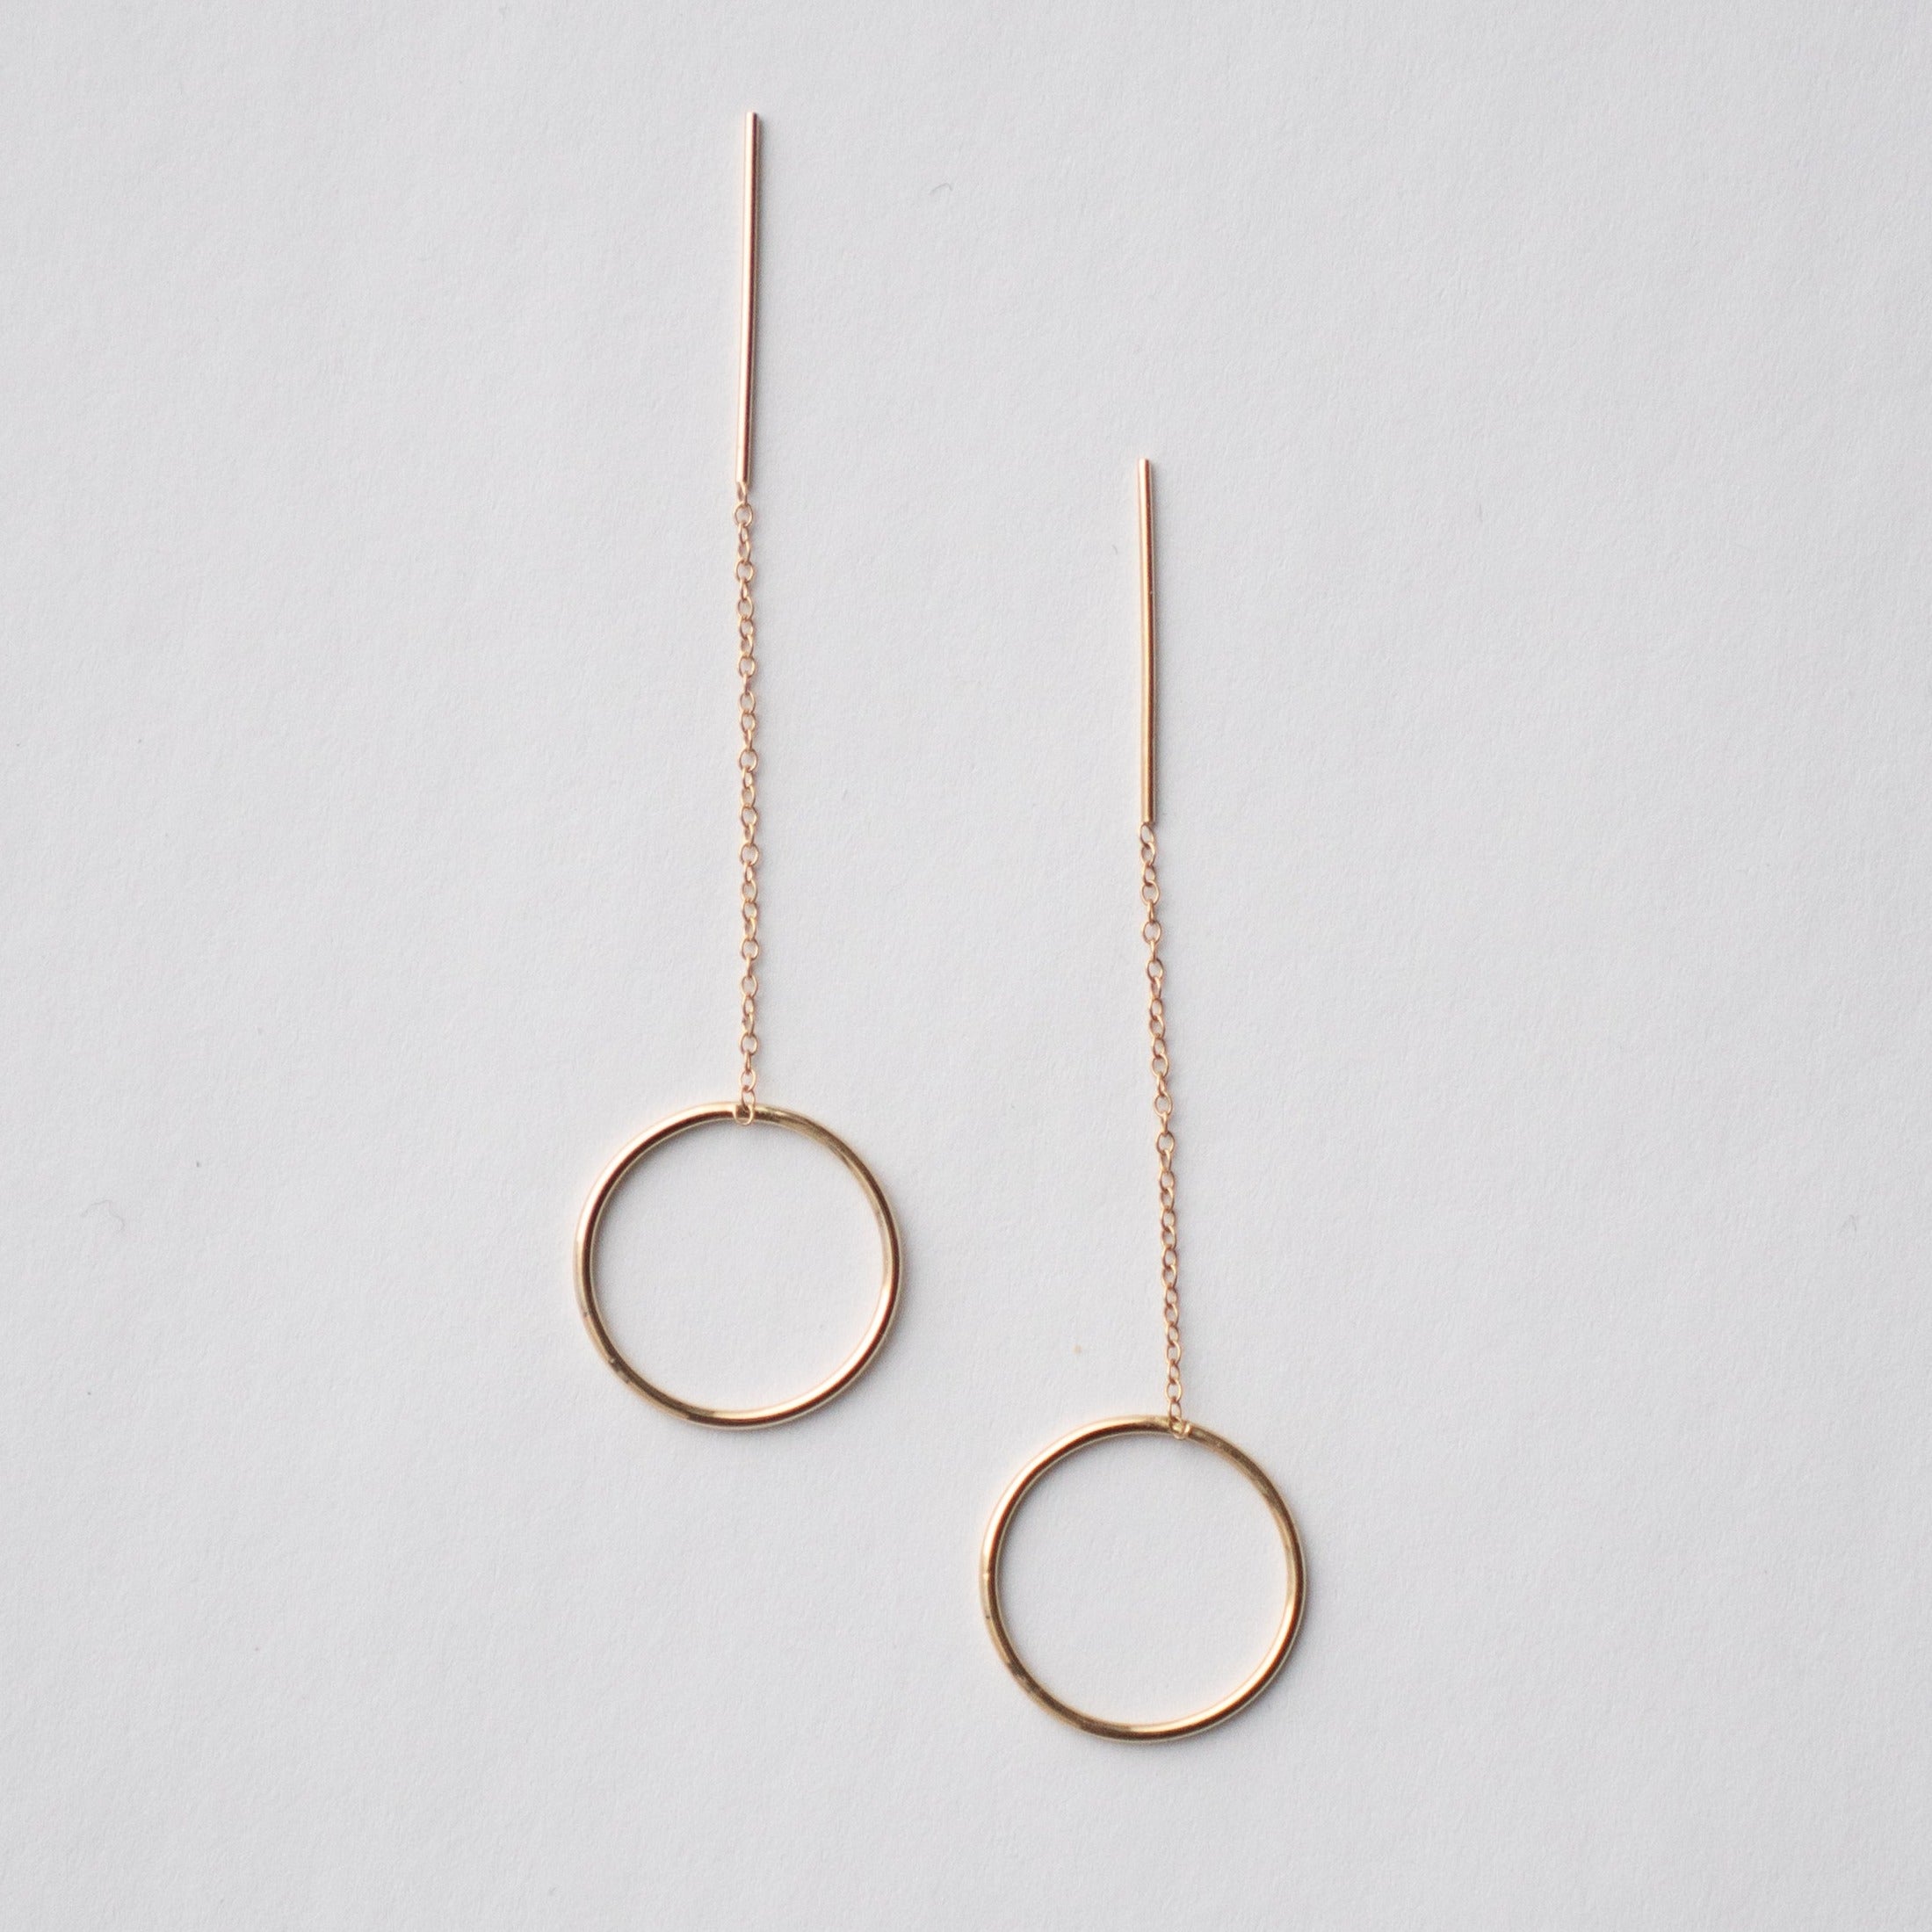 Minimalist Lili Pull-Through Circle earrings in 14 Karat yellow gold by SHW Fine Jewelry in NYC